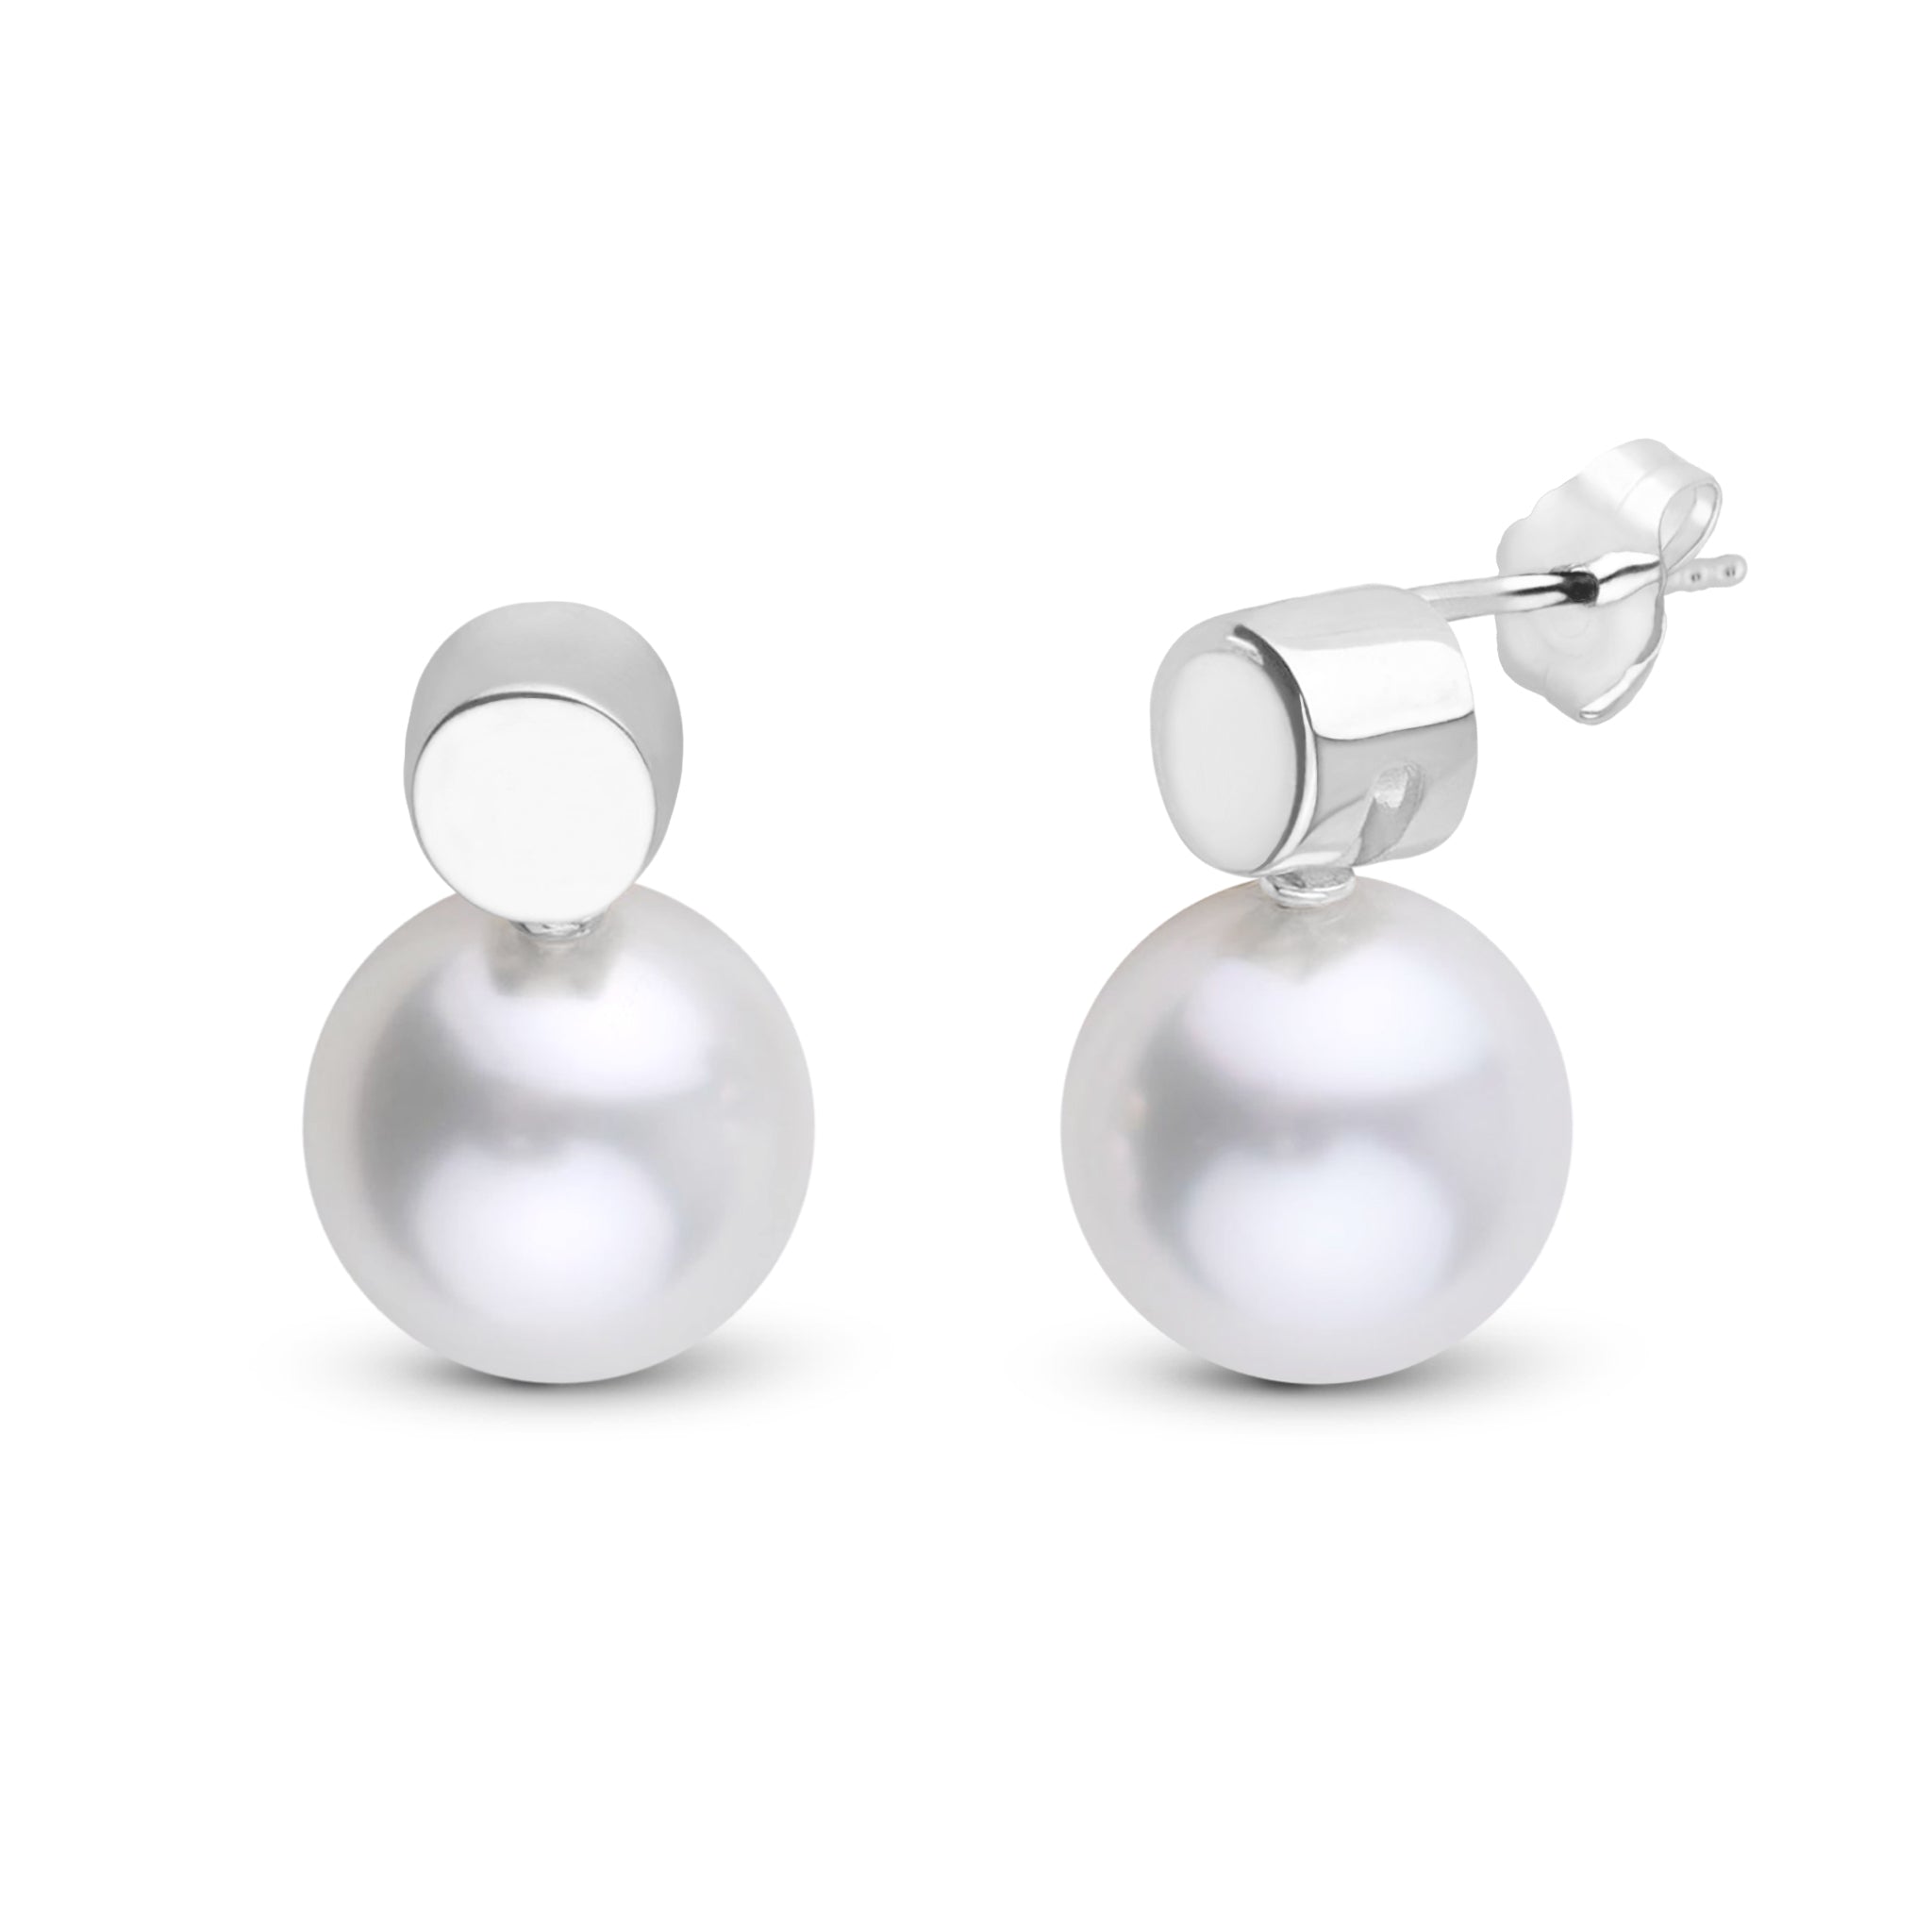 Dot Collection 10.0-11.0 mm White South Sea Pearl Earrings White Gold